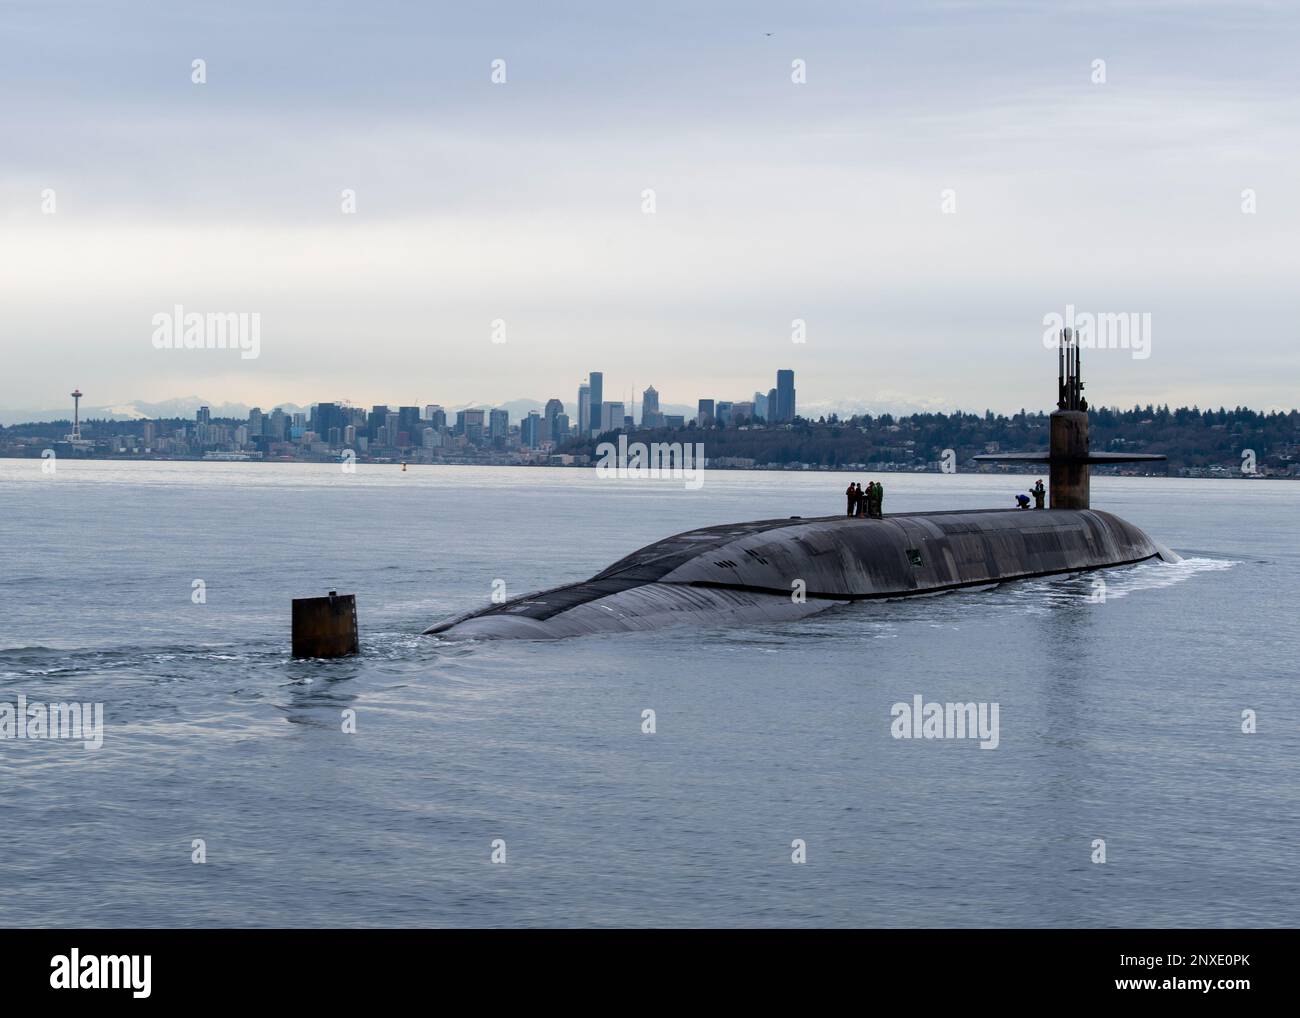 230209-N-ED185-1316  PUGET SOUND, Wash. (Feb. 9, 2023) The Ohio-class ballistic missile submarine USS Louisiana (SSBN 743) transits Puget Sound past the Seattle skyline following a 41-month engineered refueling overhaul at Puget Sound Naval Shipyard and Intermediate Maintenance Facility, February 9, 2023. Louisiana is one of eight ballistic-missile submarines stationed at Naval Base Kitsap-Bangor, providing the most survivable leg of the strategic deterrence triad for the United States. Stock Photo